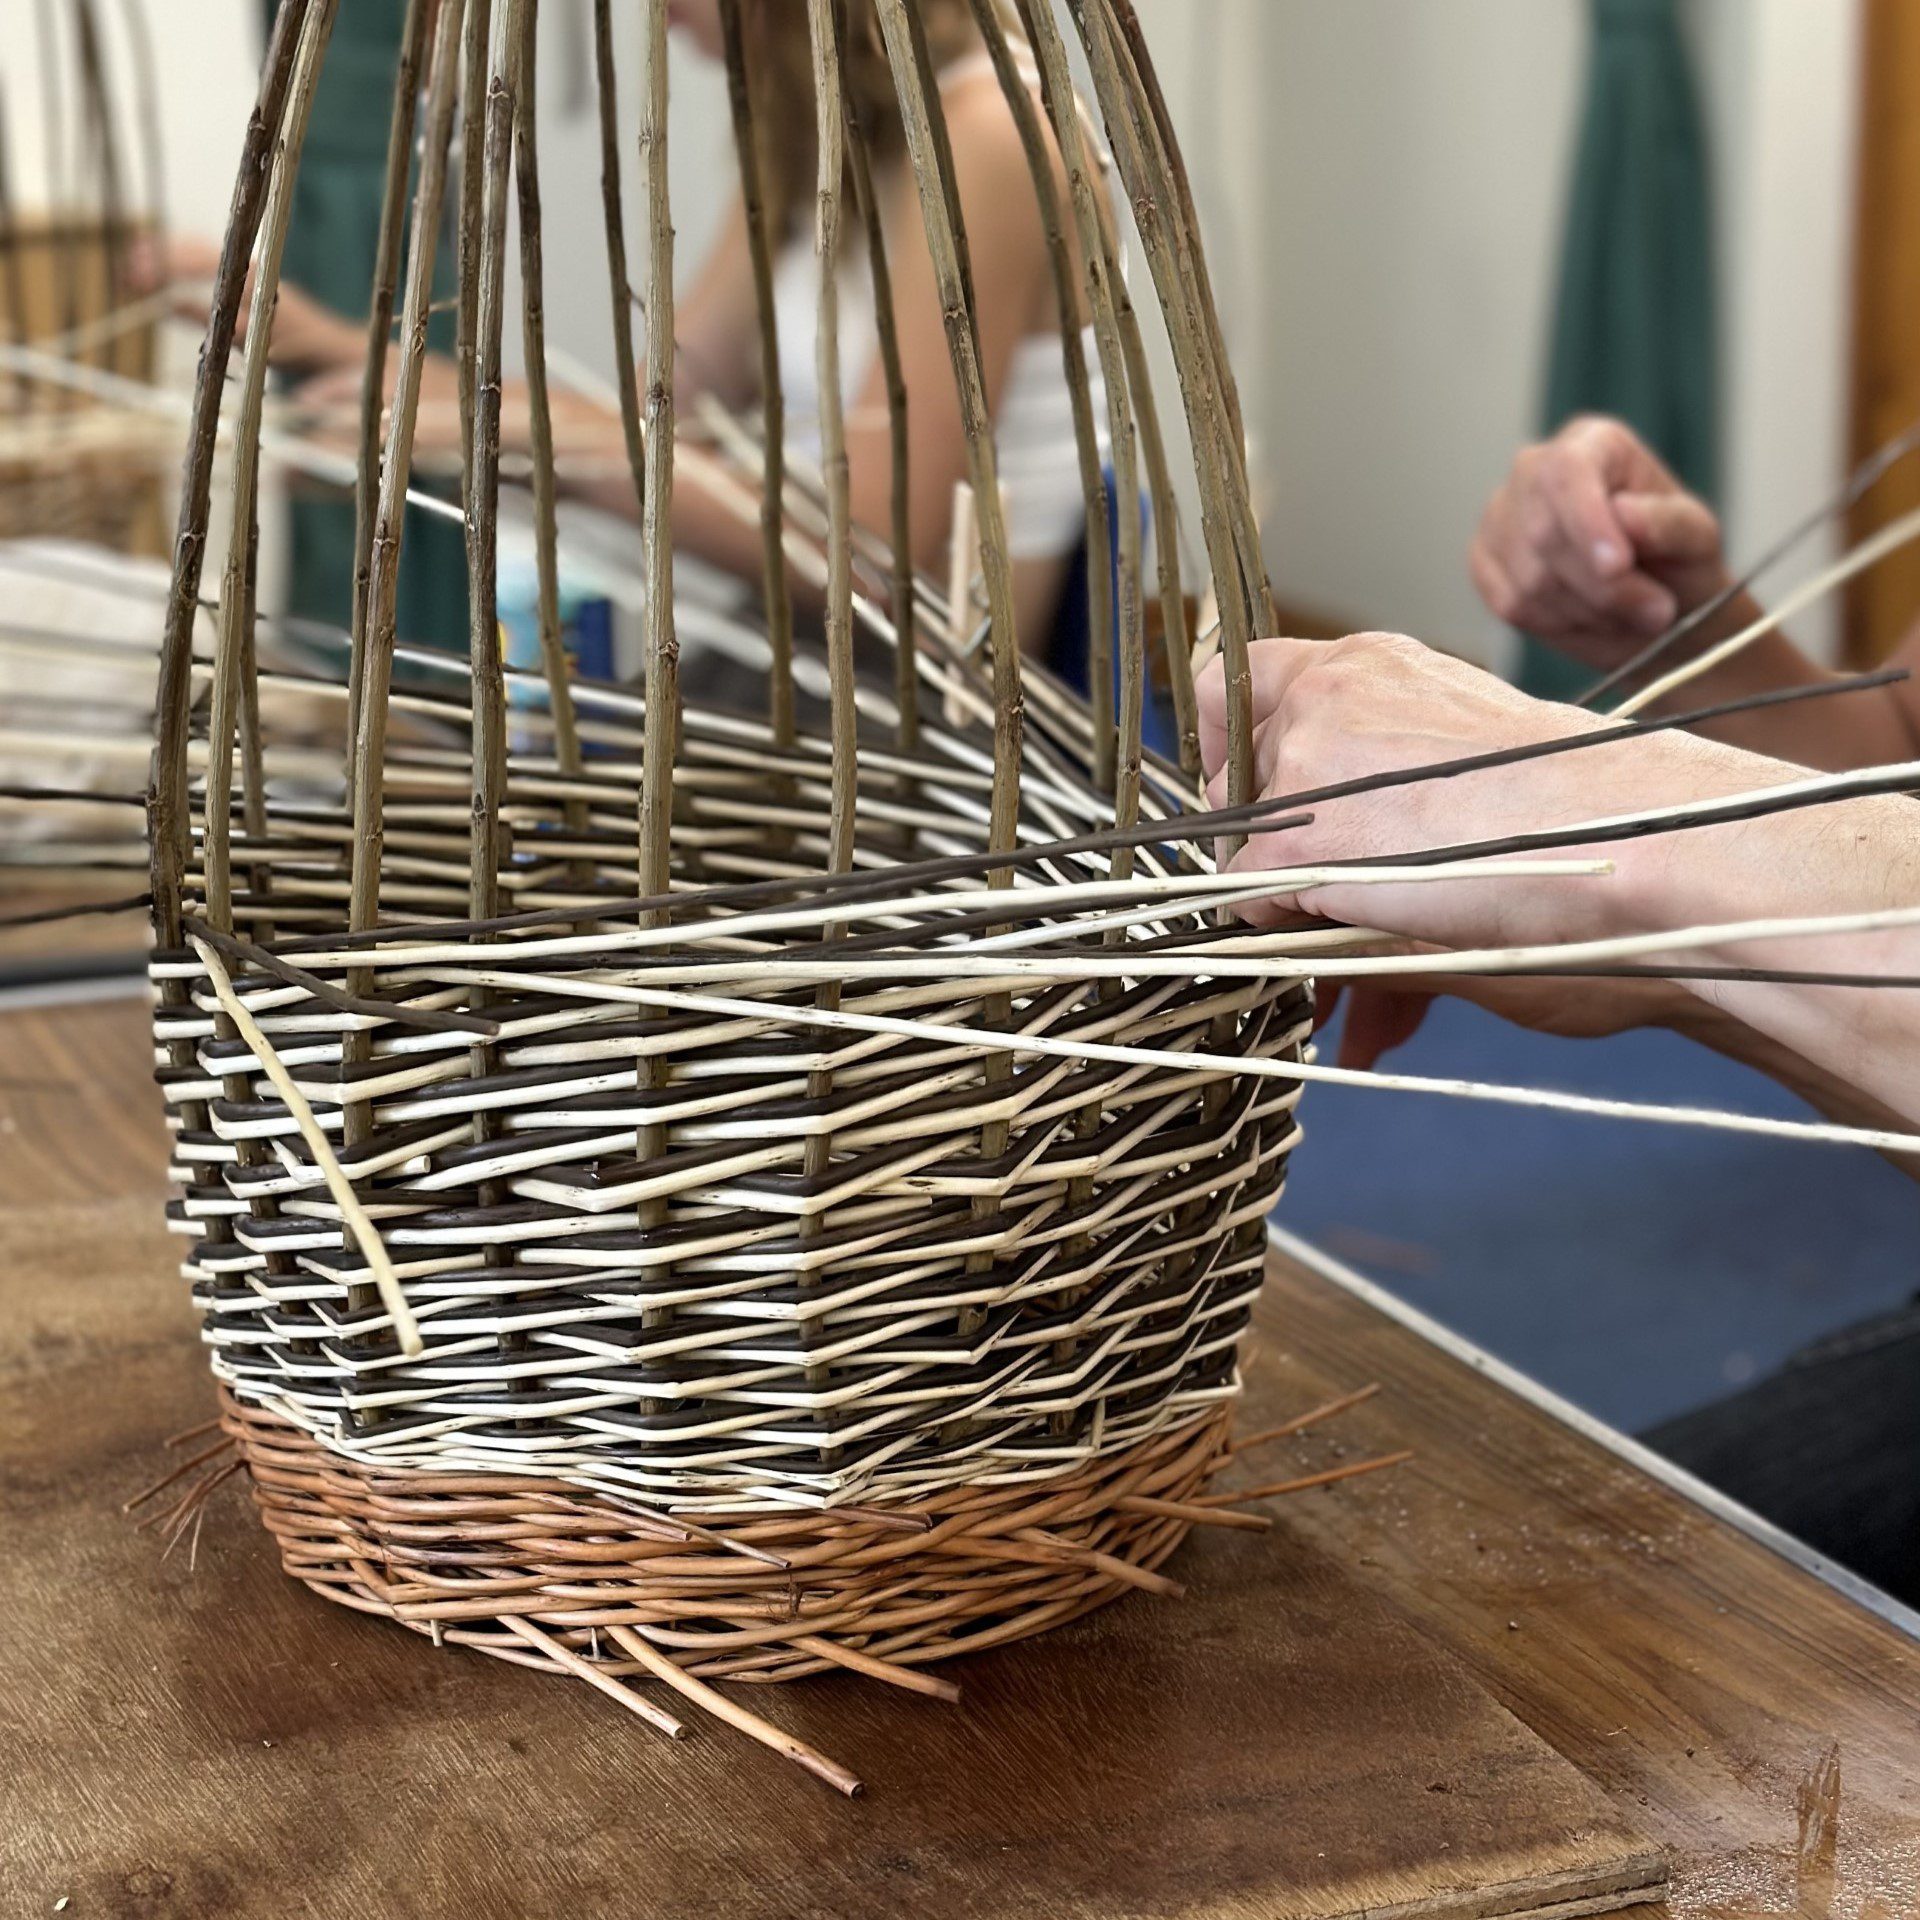 Basketry Course: Willow Weaving 